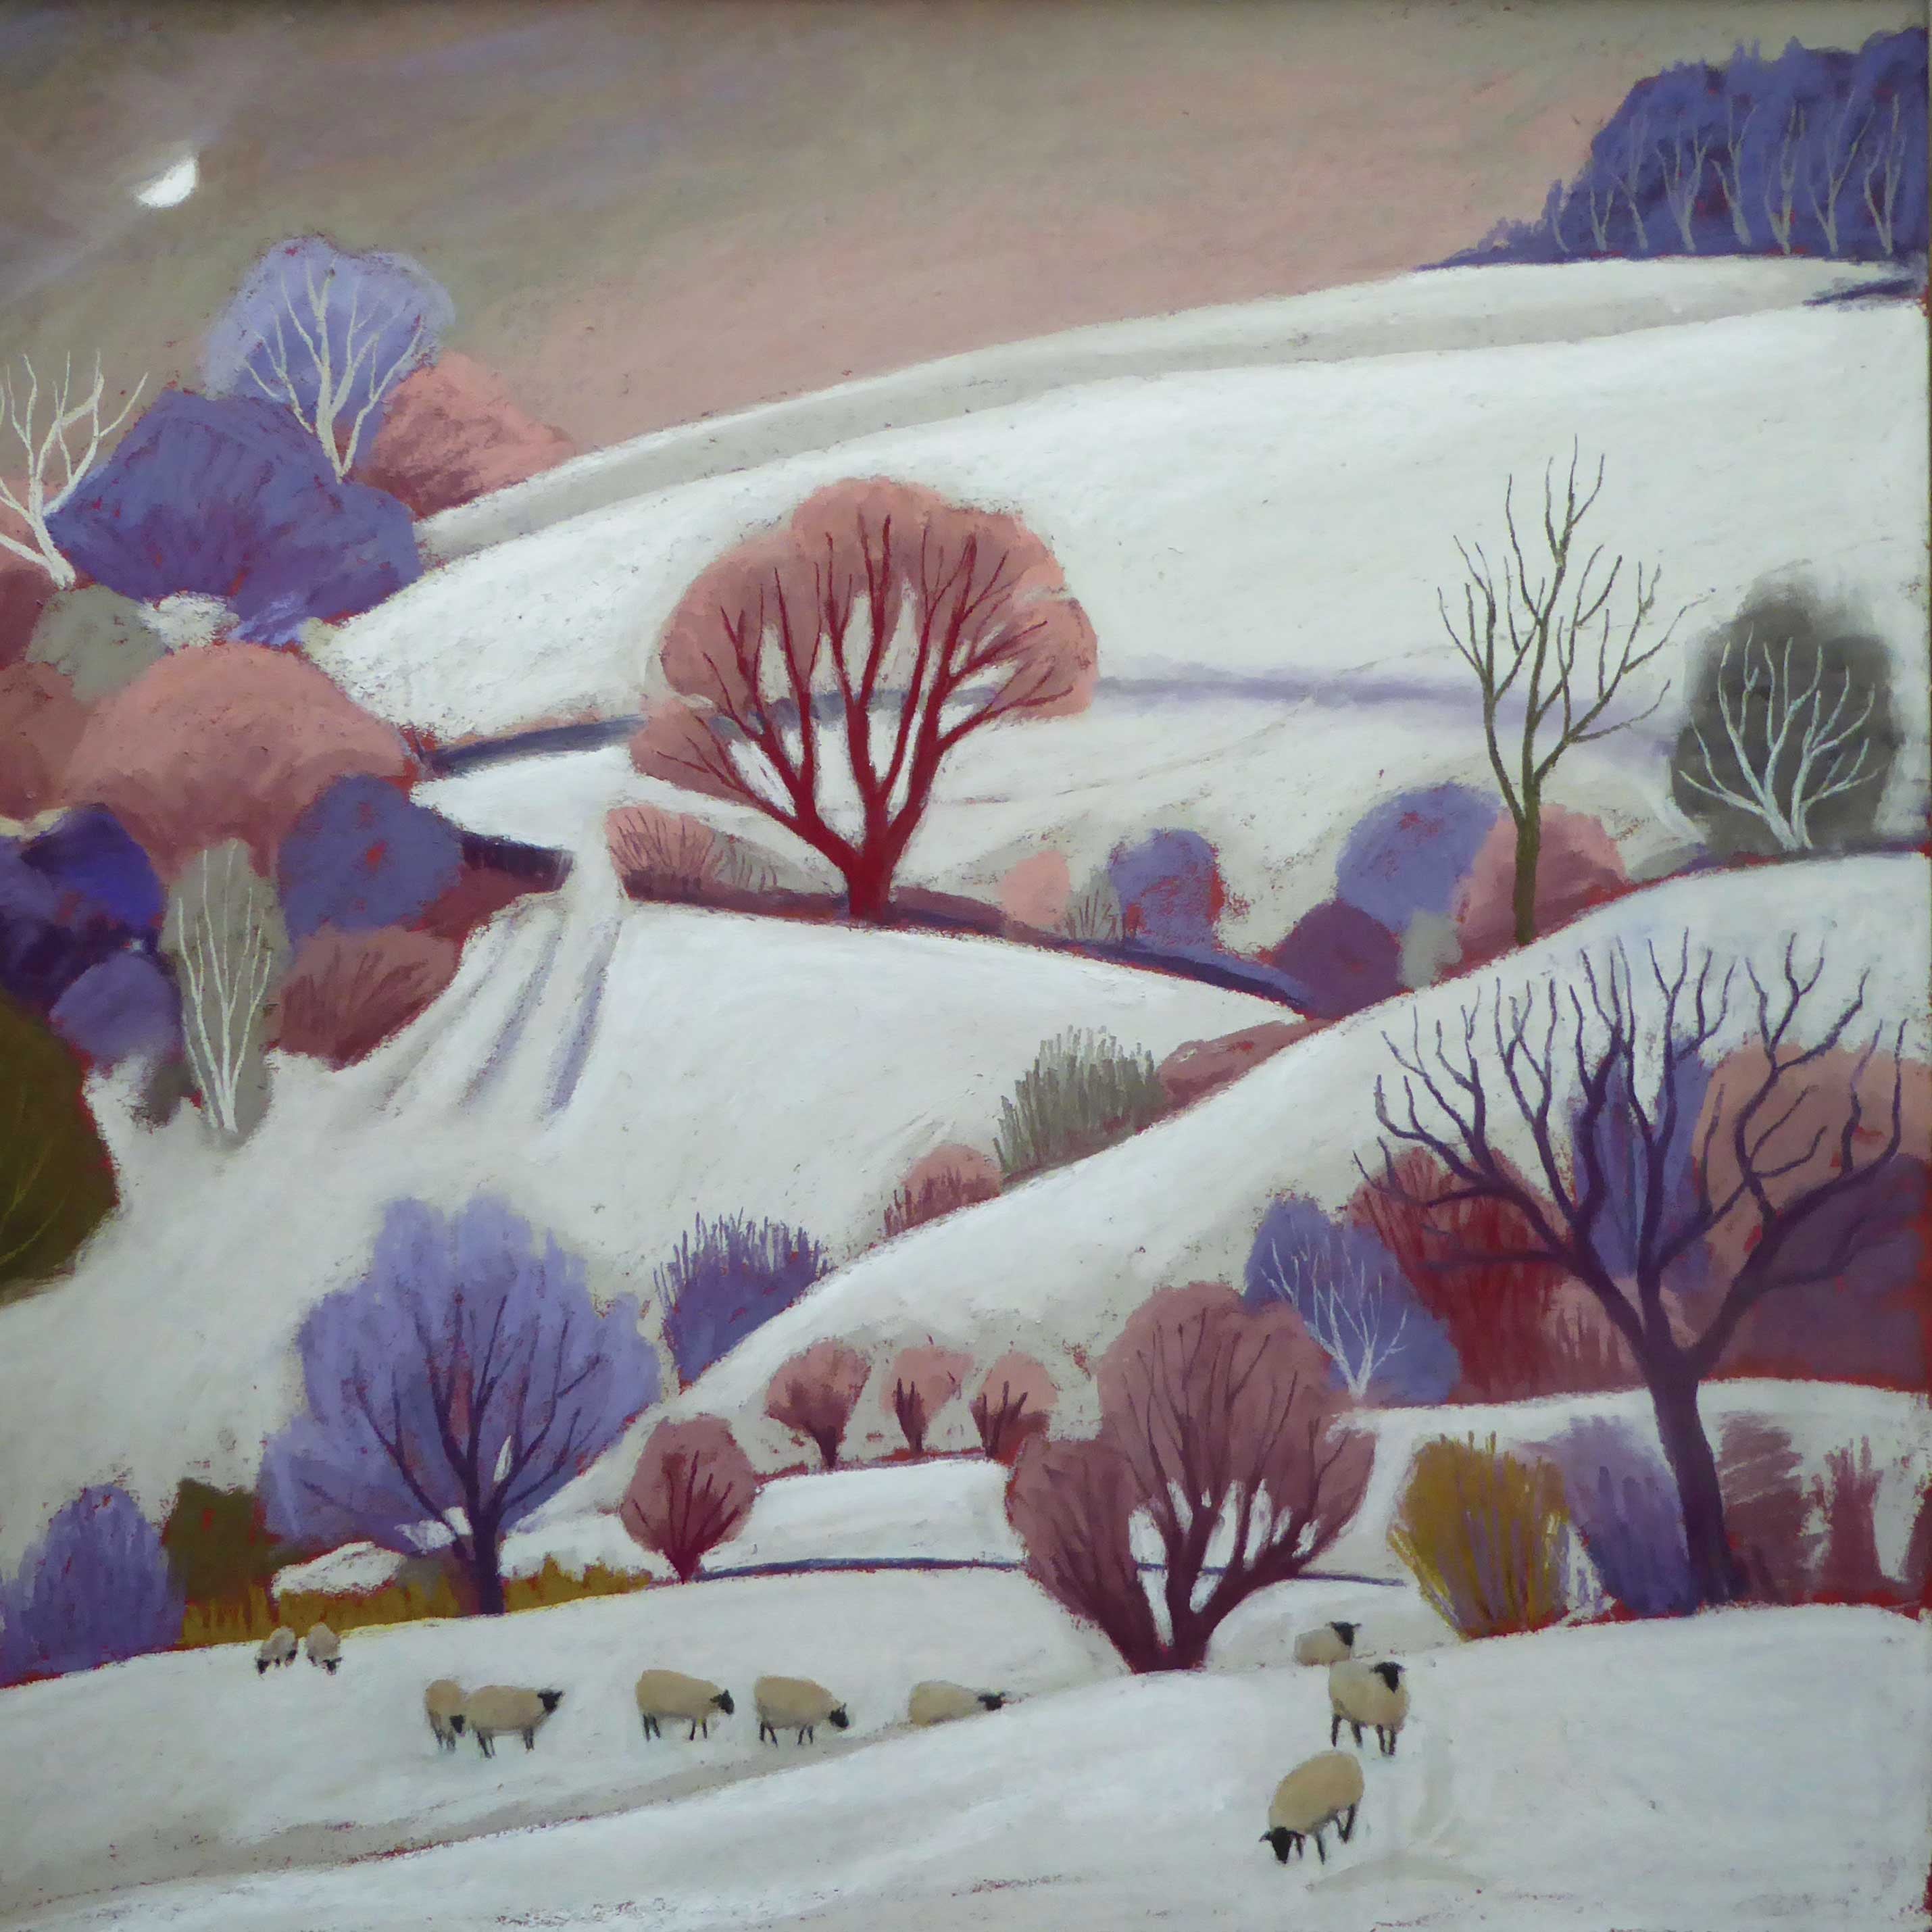 Deep Midwinter by Sue Campion, Fine Art Greeting Card, Pastel, Winter landscape with sheep